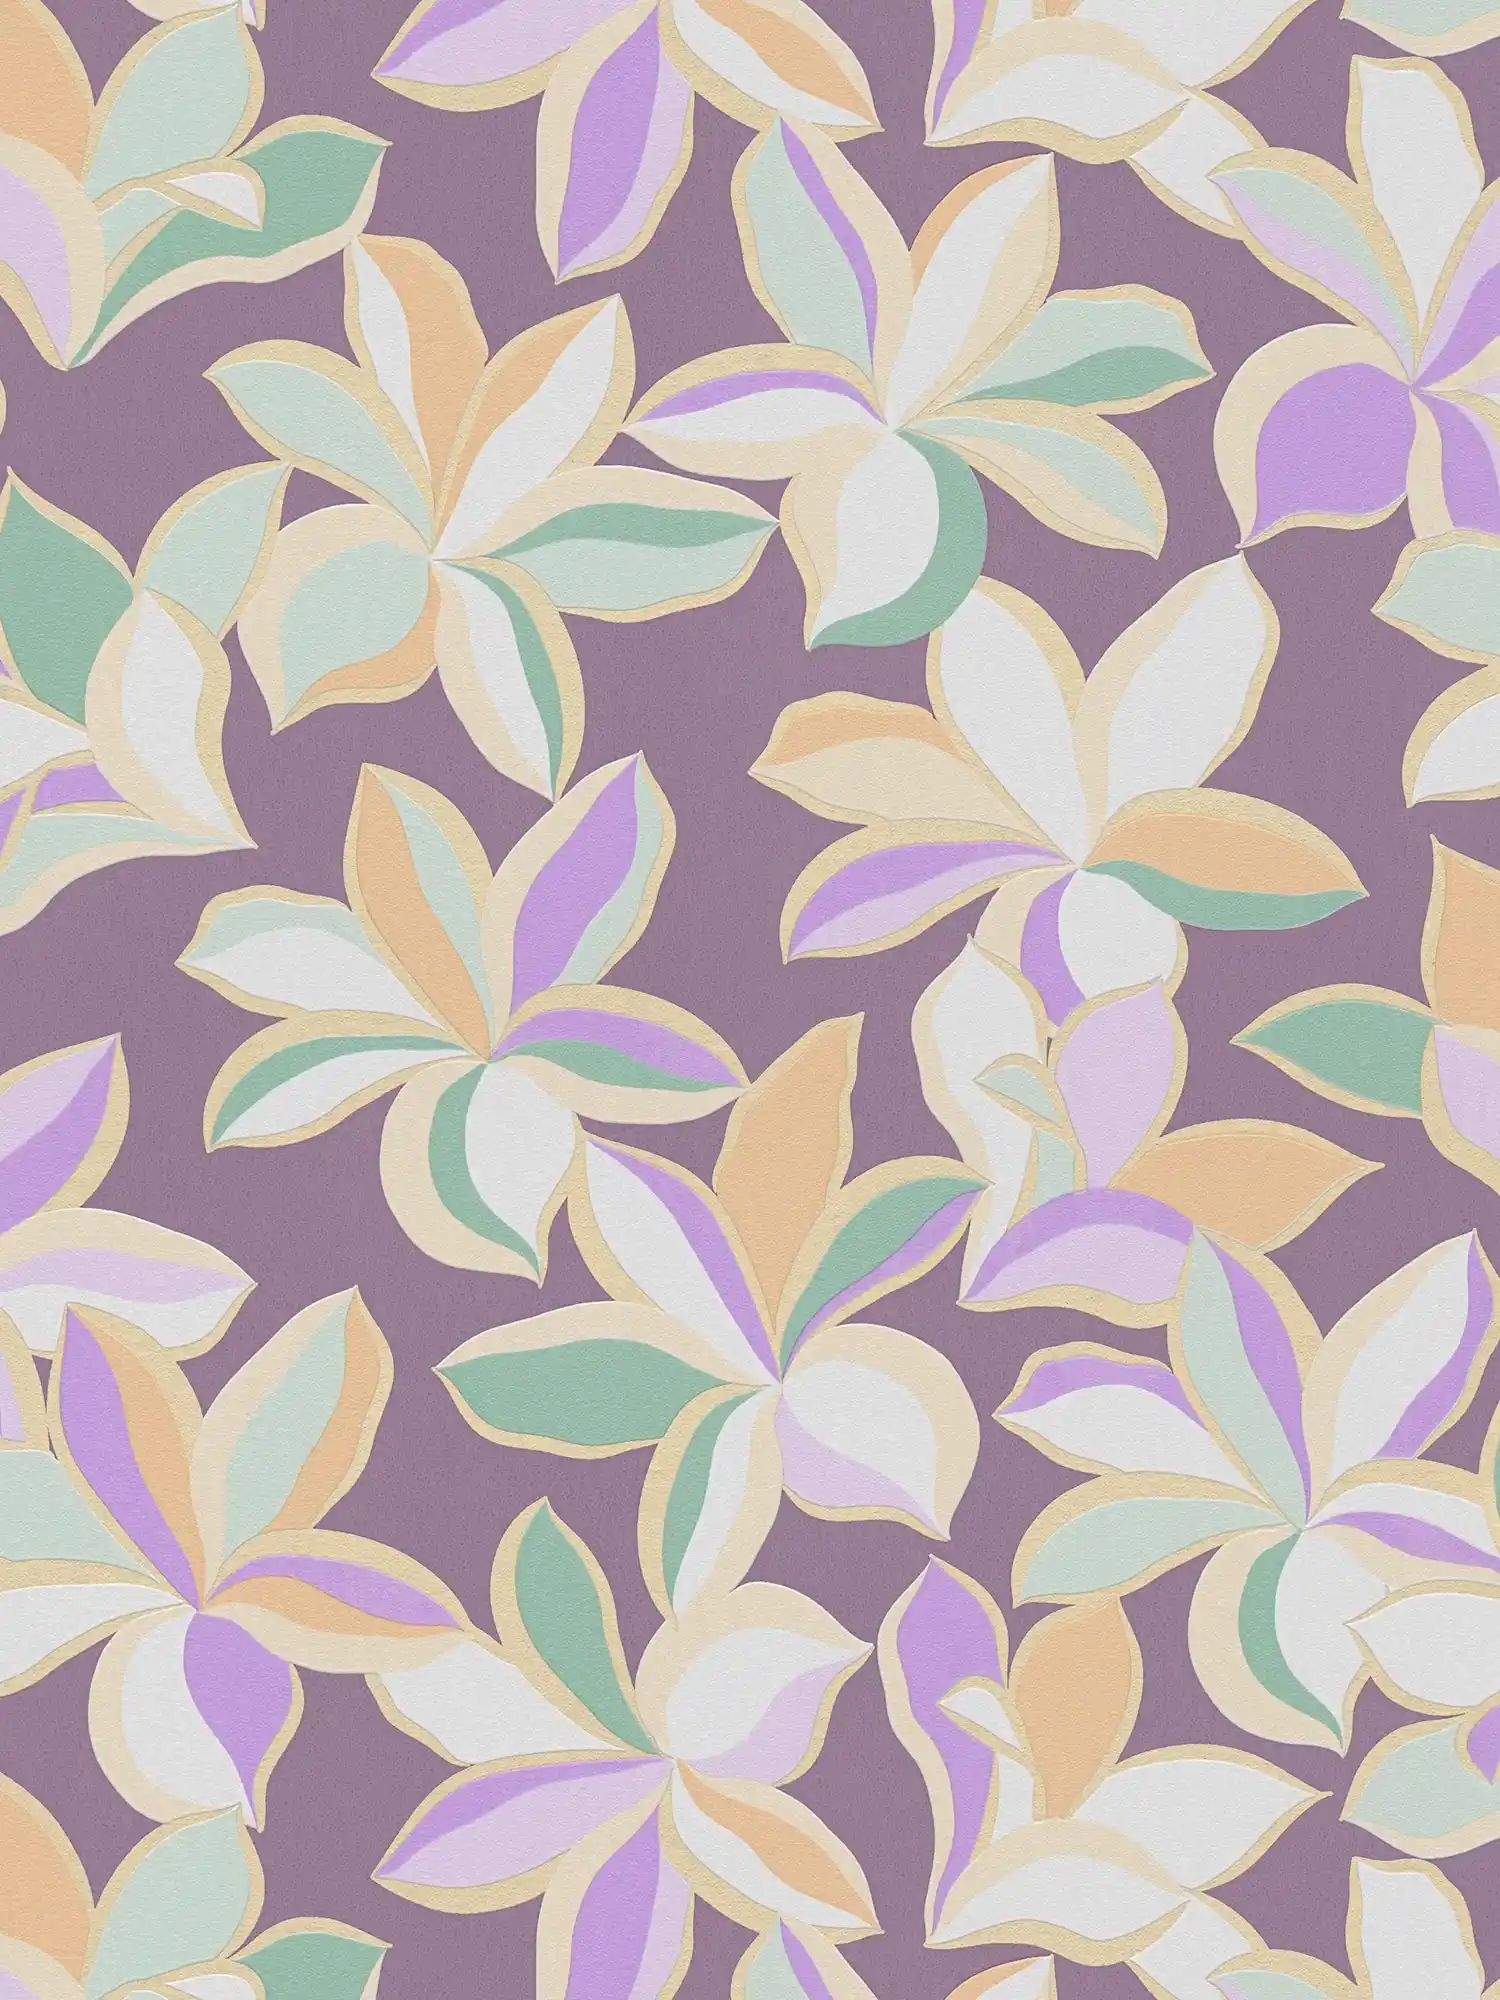 Floral wallpaper with shiny pattern - purple, gold, green
